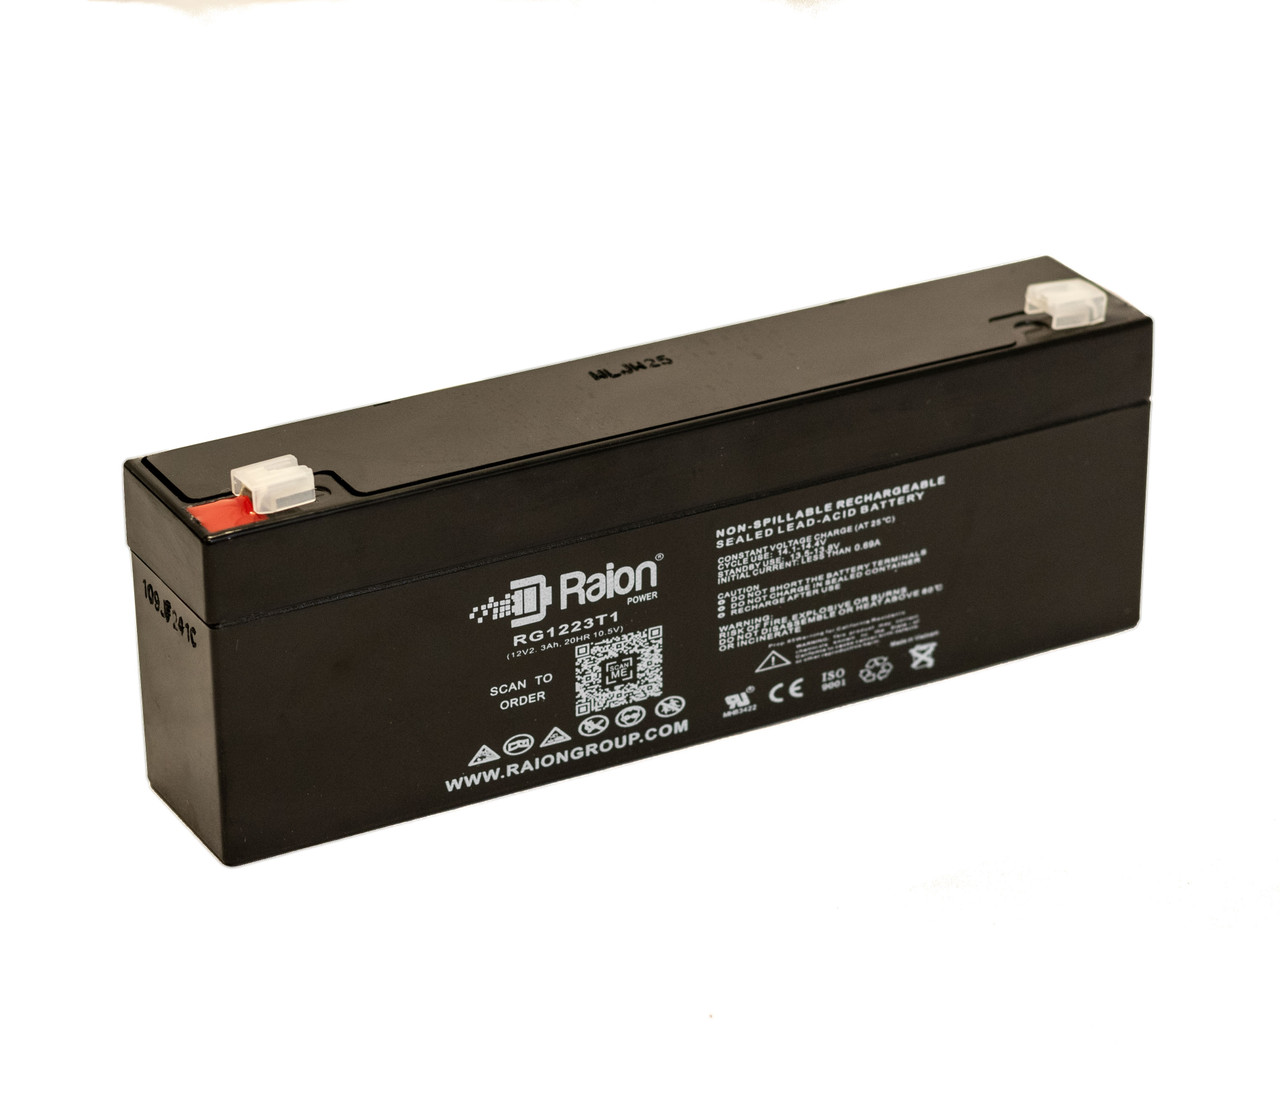 Raion Power RG1223T1 Replacement Battery for Troy-Bilt 34346 Lawn Mower